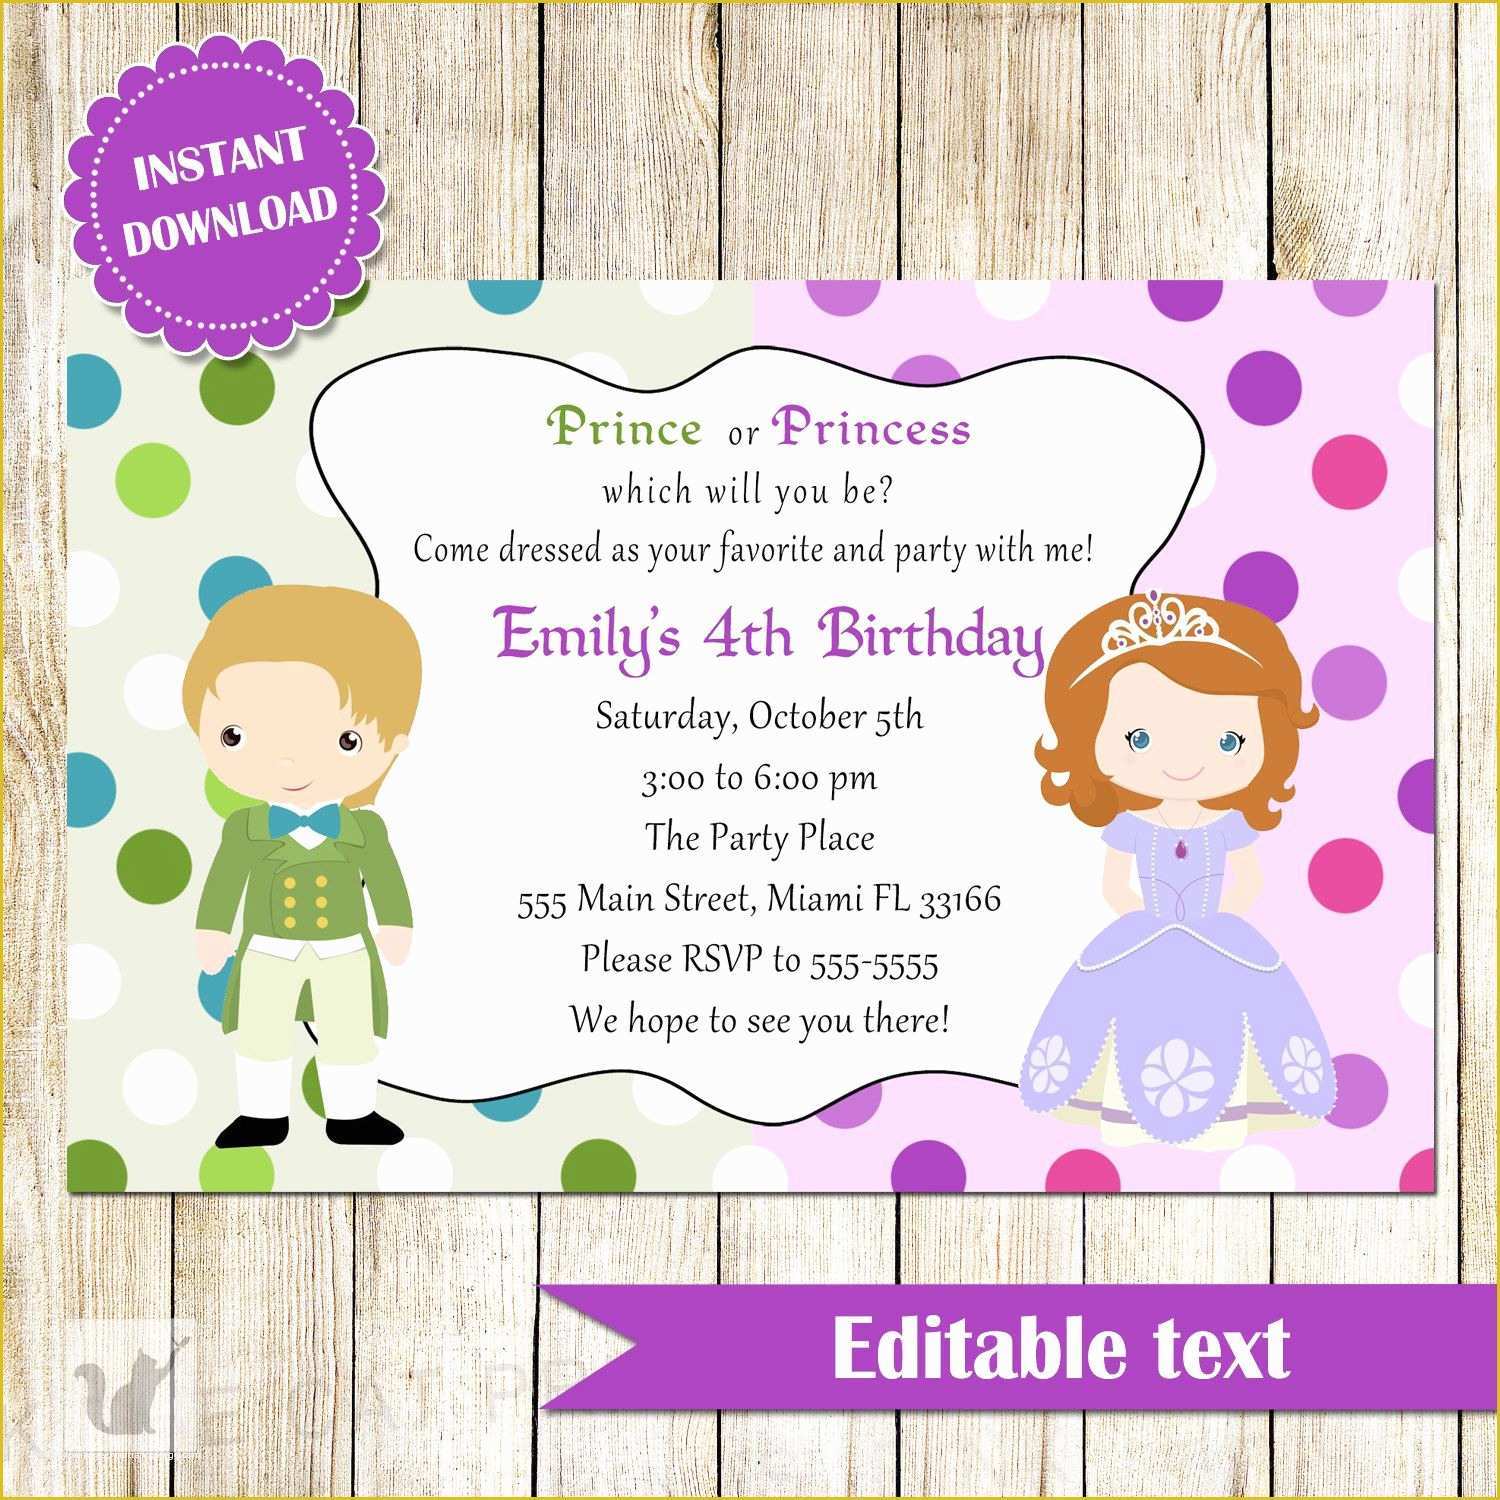 Free Childrens Party Invites Templates Of Childrens Birthday Party Invites toddler Birthday Party